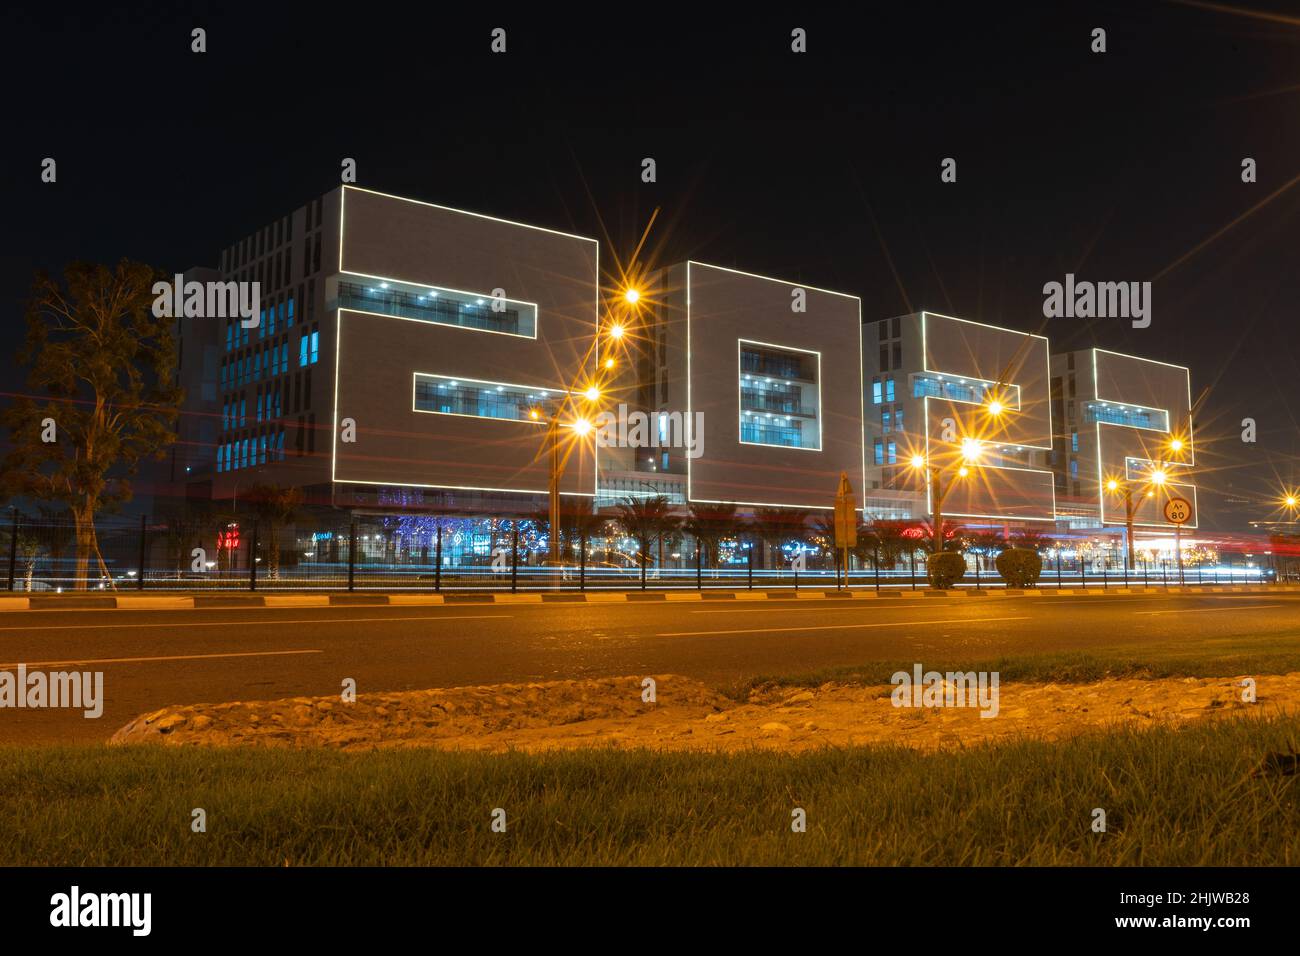 DOHA, QATAR - JANUARY 31, 2022: View of the 2022 building at night, located in the Aspire Zone in Doha, Qatar, shaped with the 2022 numbers built for Stock Photo